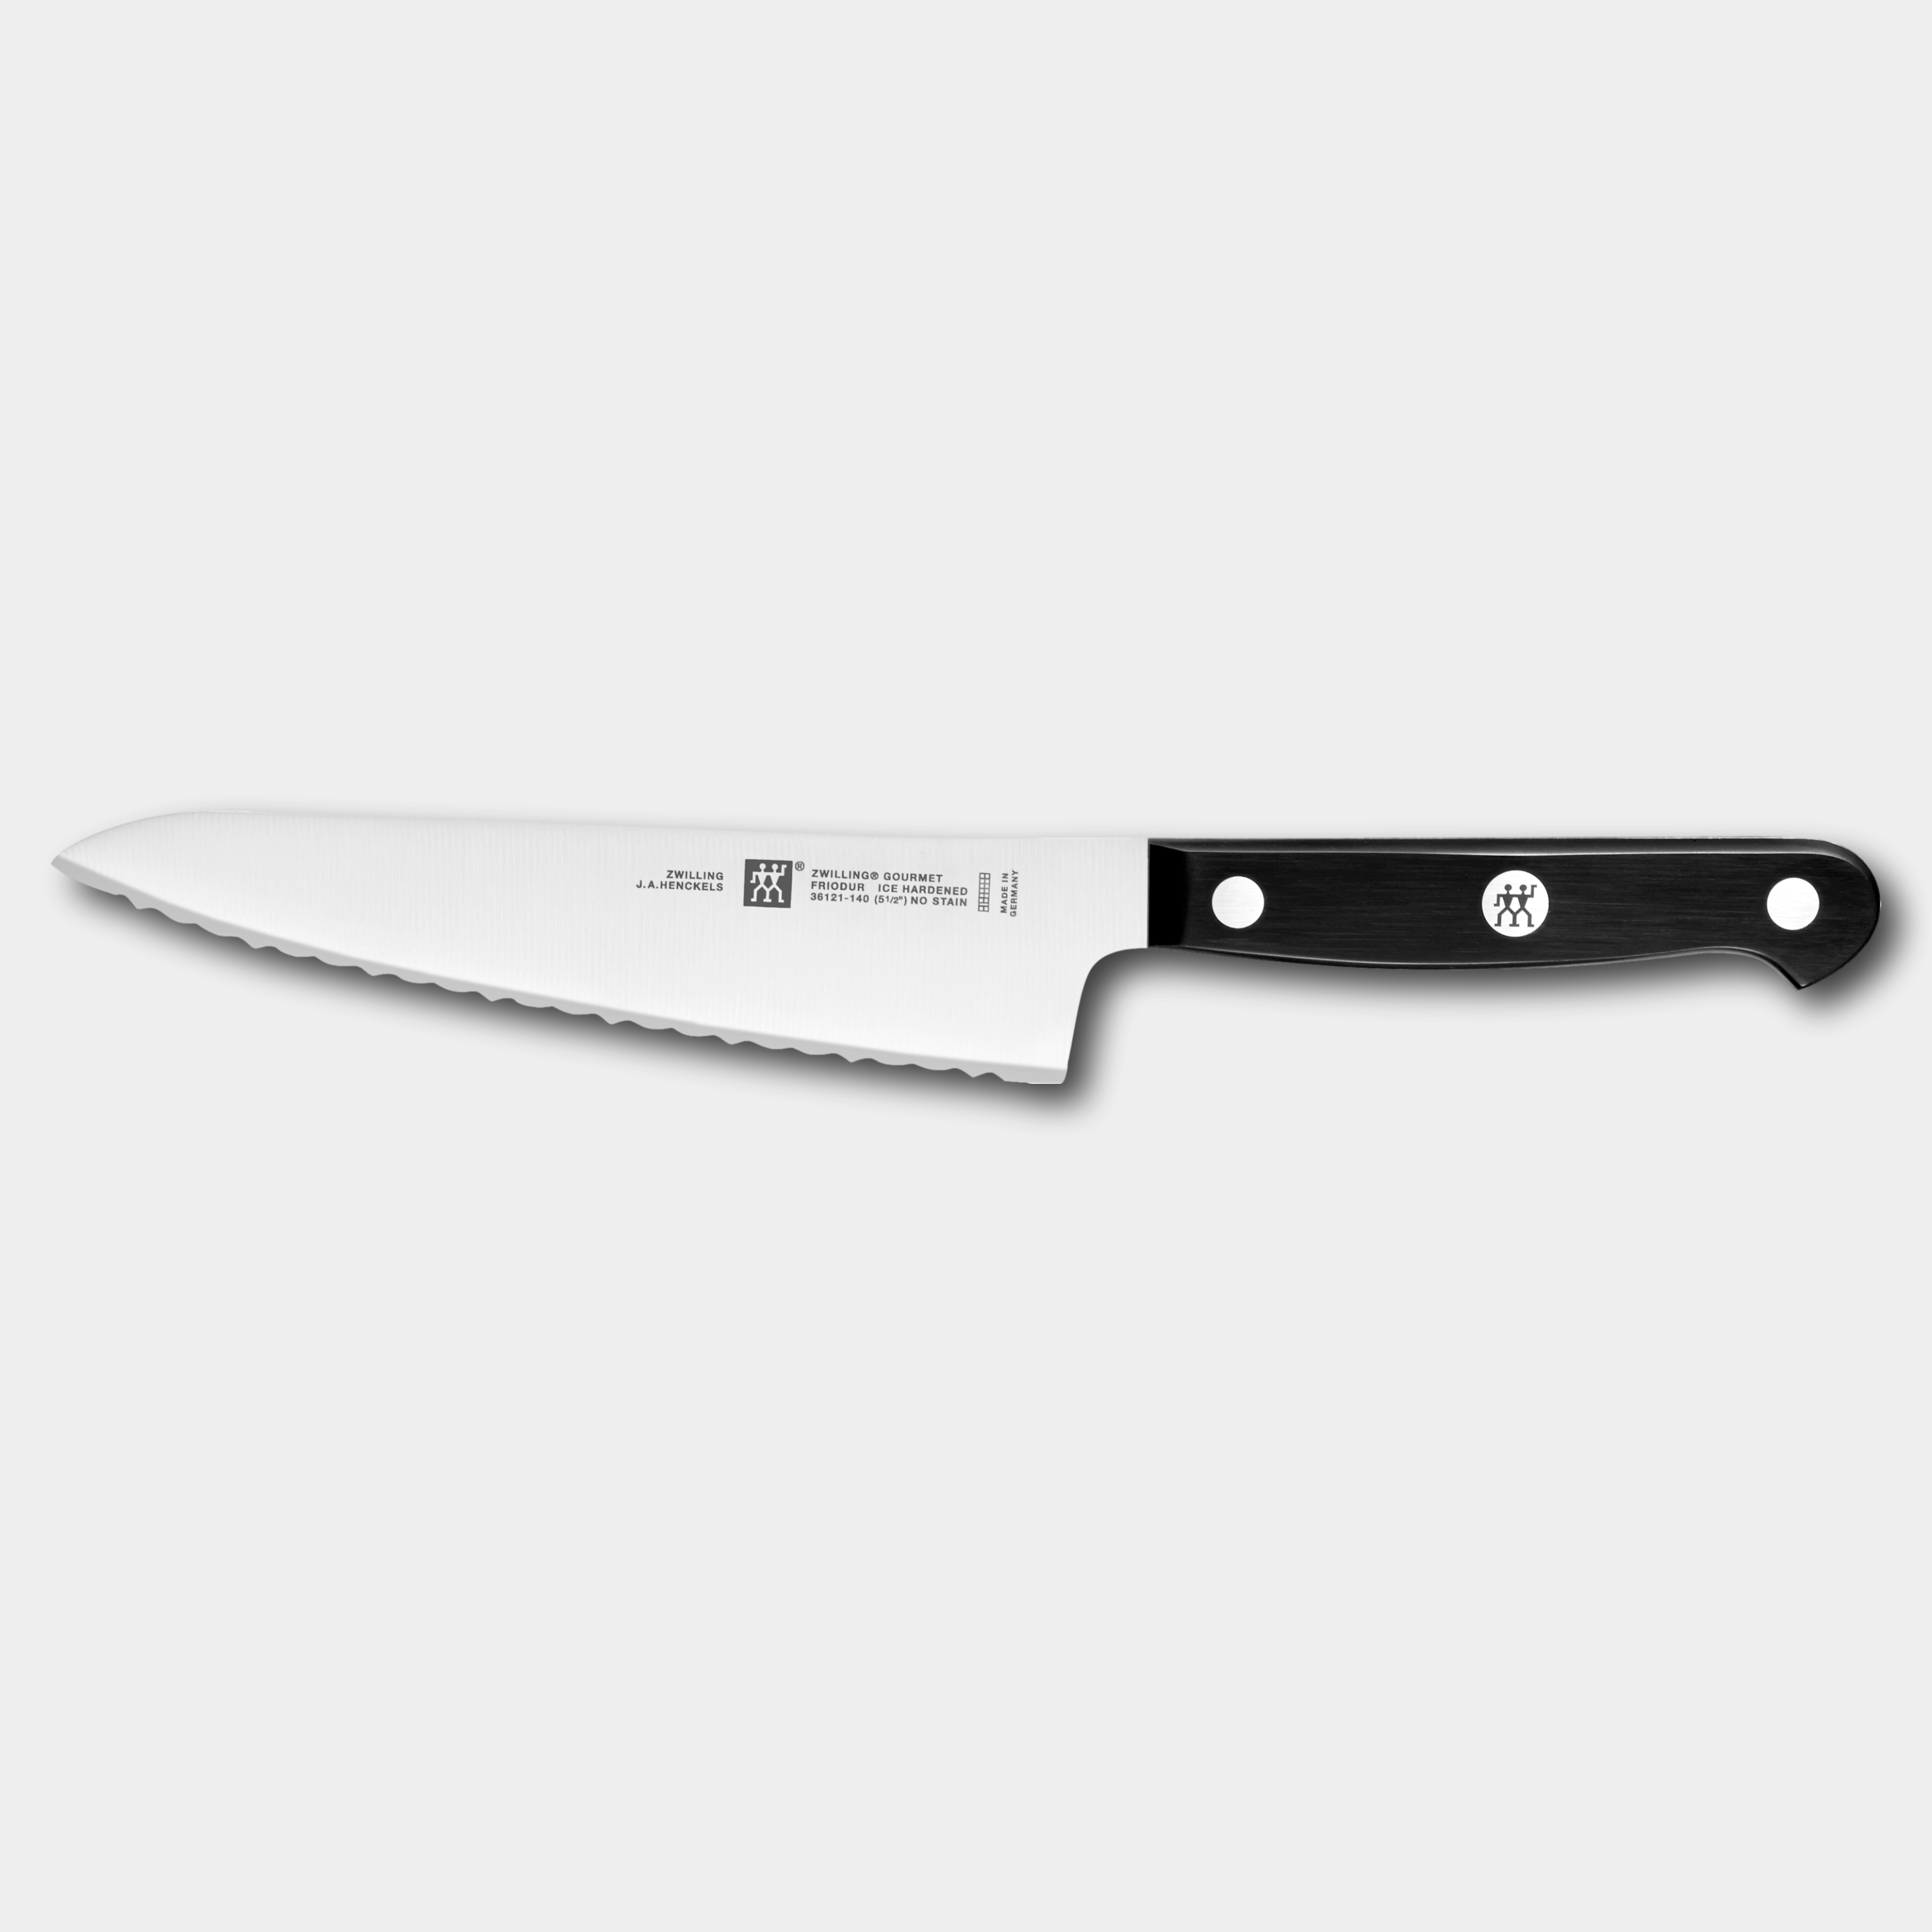 ZWILLING® Gourmet 14cm Serrated Compact Chef's Knife